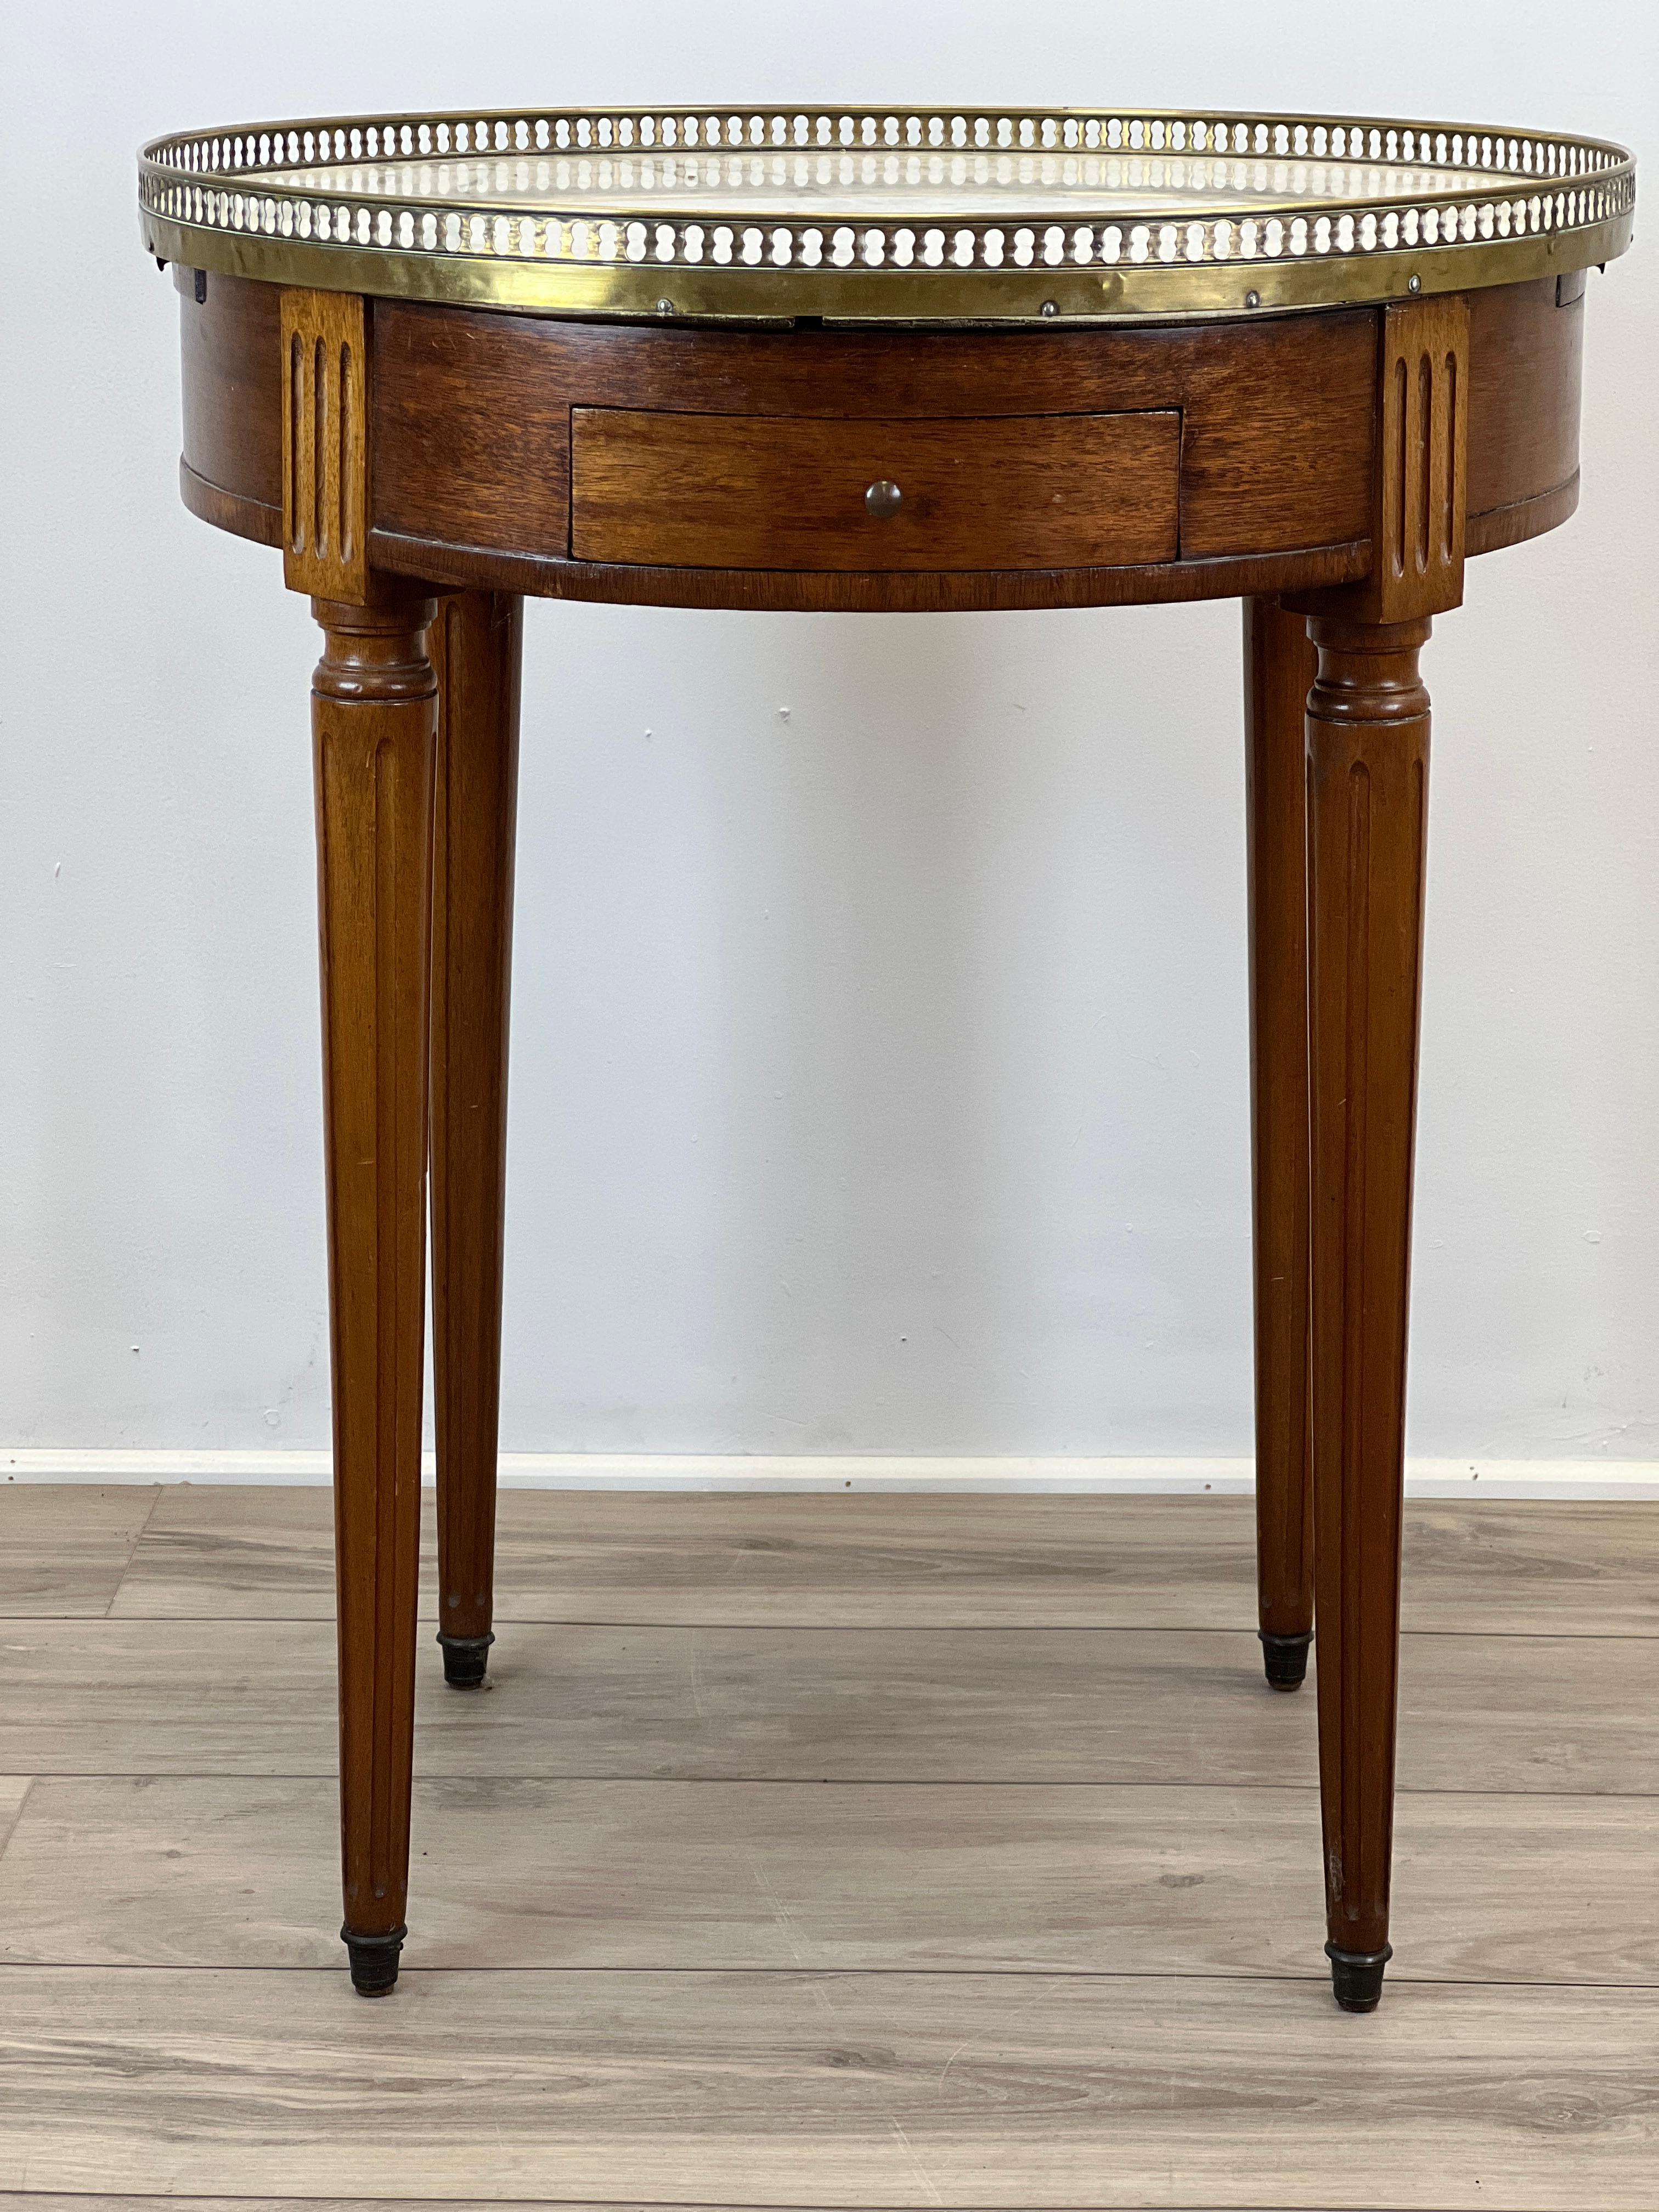 This is a late 19th century French Bouillotte table made from Mahogany and Oak. The top is made of white marble with a brass gallery perimeter in the traditional style. There are two drawers front and rear with hand cut dovetail joints. There are